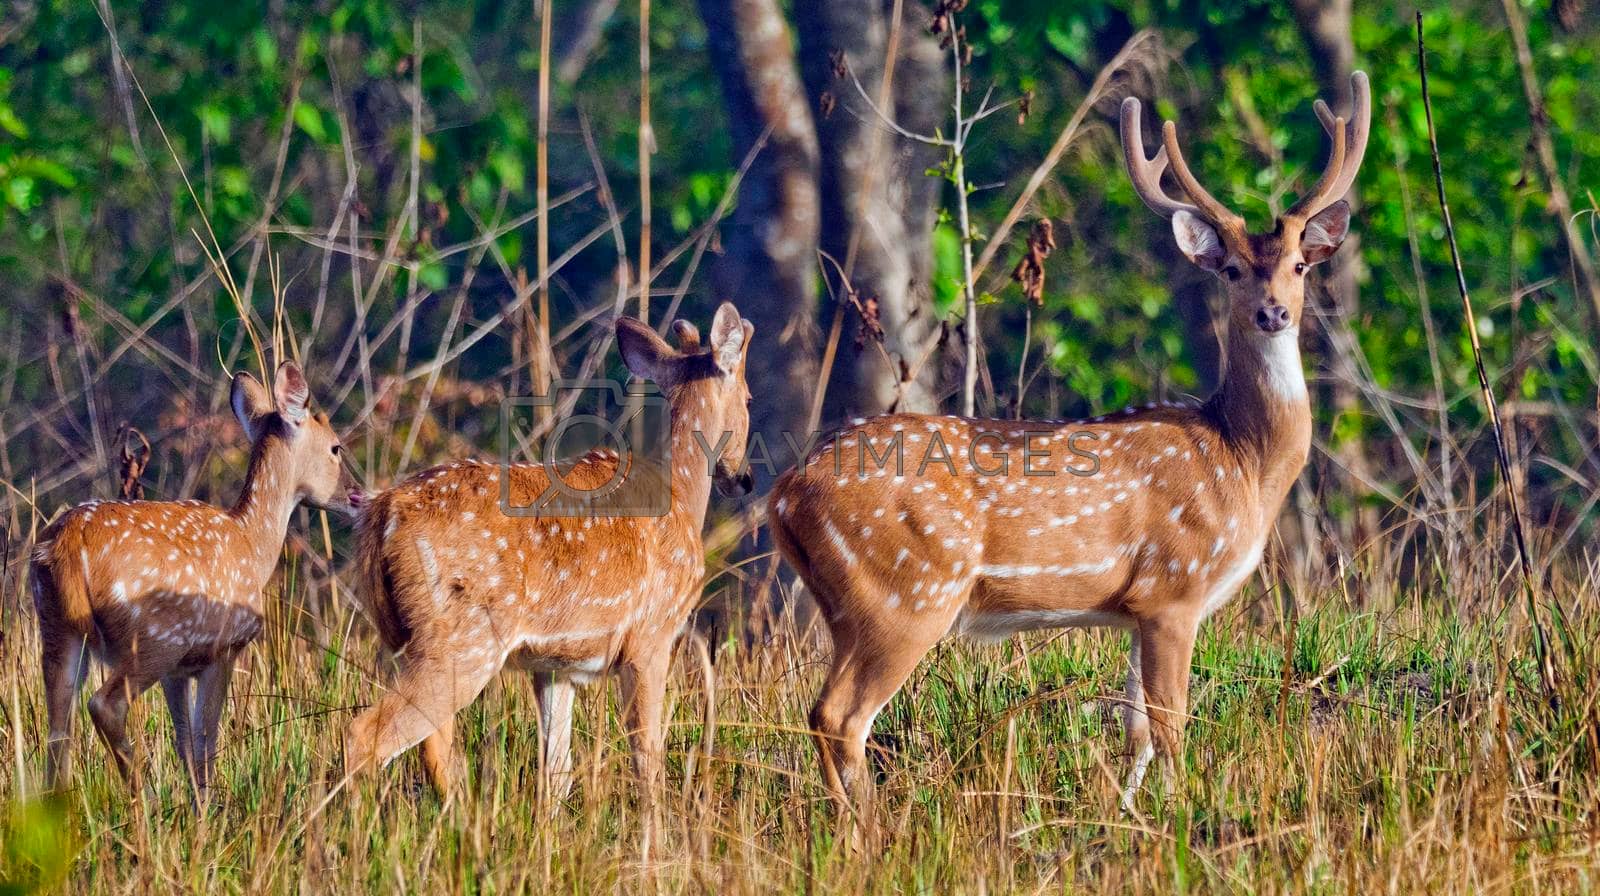 Royalty free image of Spotted Deer, Royal Bardia National Park, Nepal by alcaproac